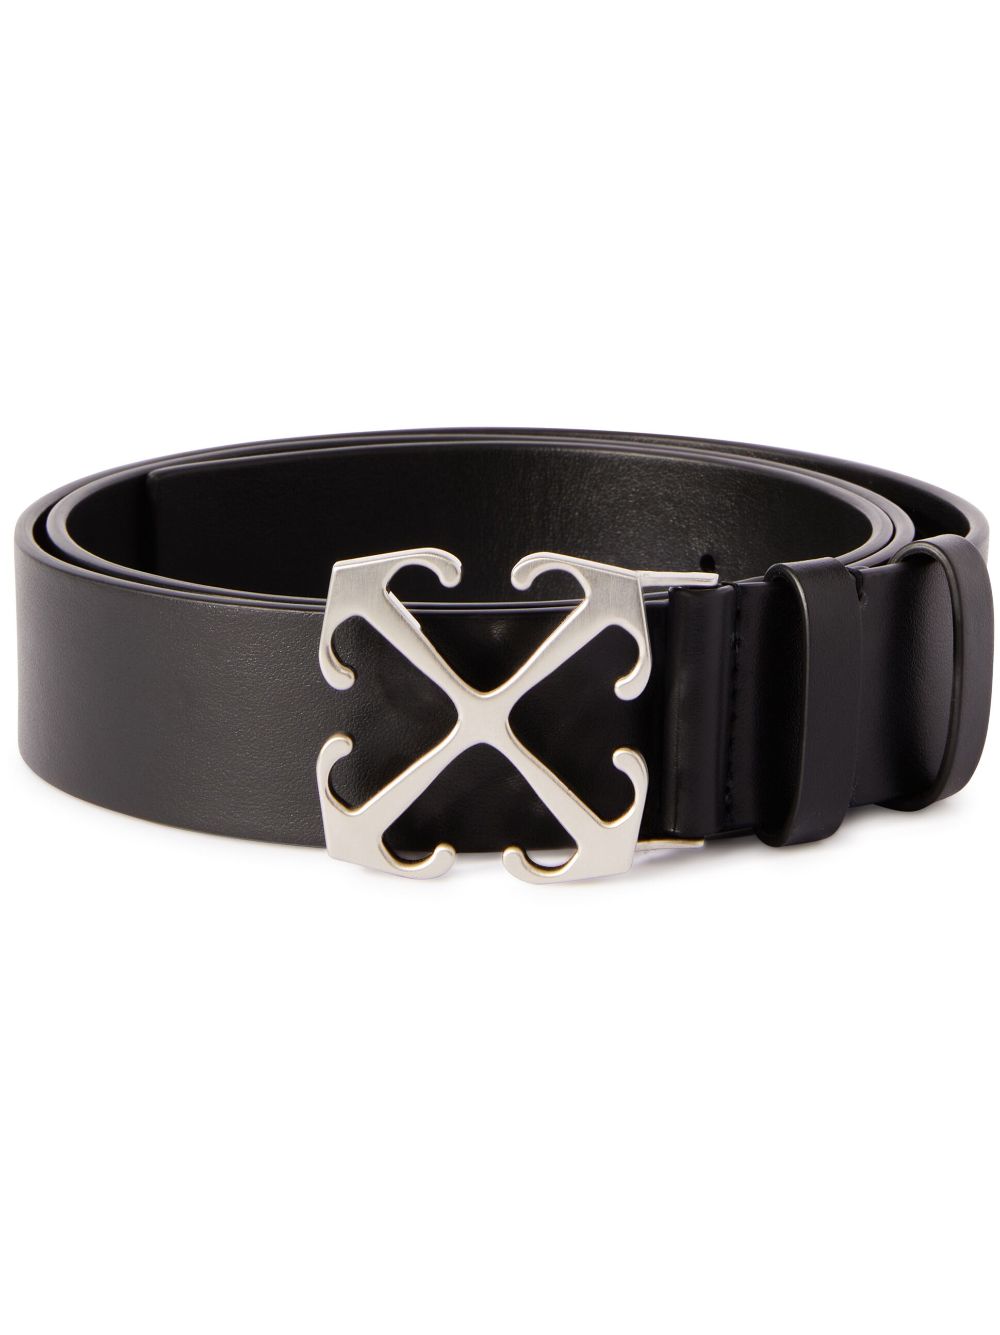 Off-White - Black double sided leather belt with metal logo  OWRB101F23LEA001 - buy with Netherlands delivery at Symbol